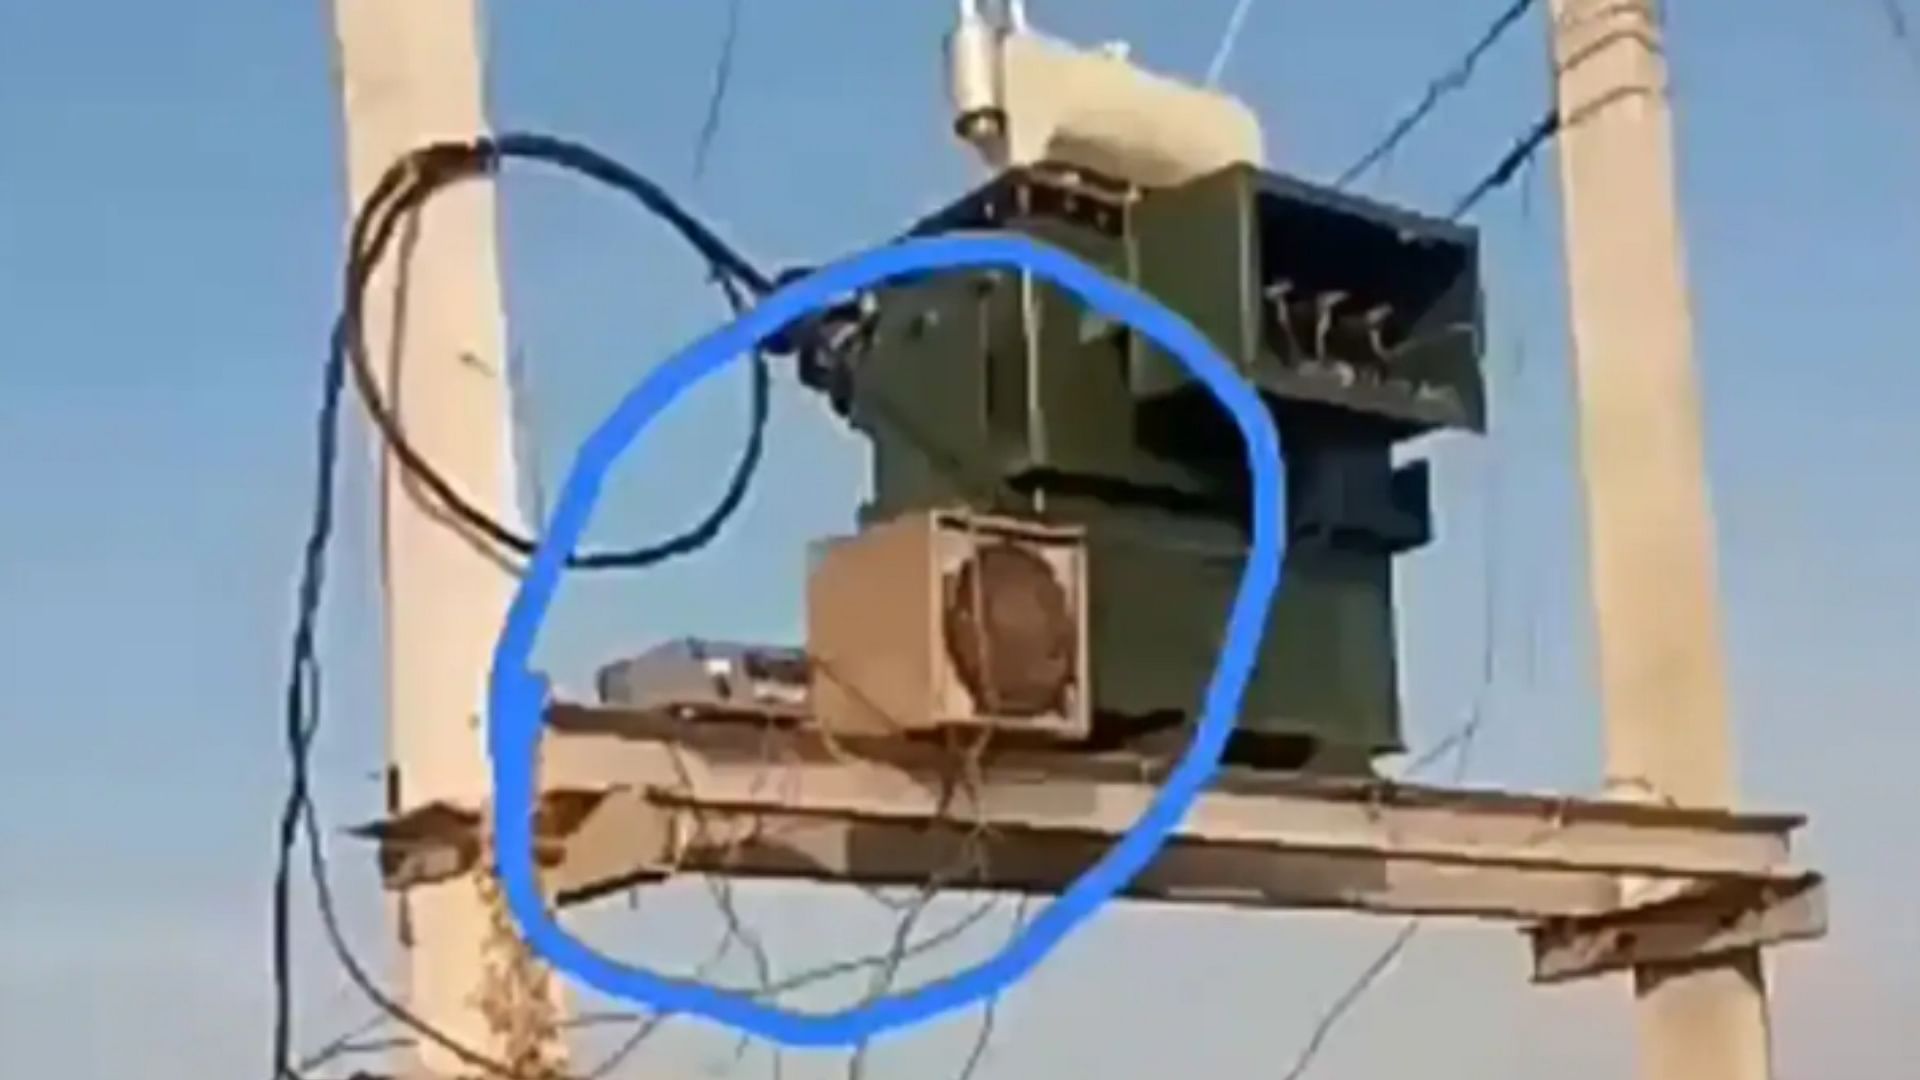 desi jugaad man connected music system to electricity transformer video went viral